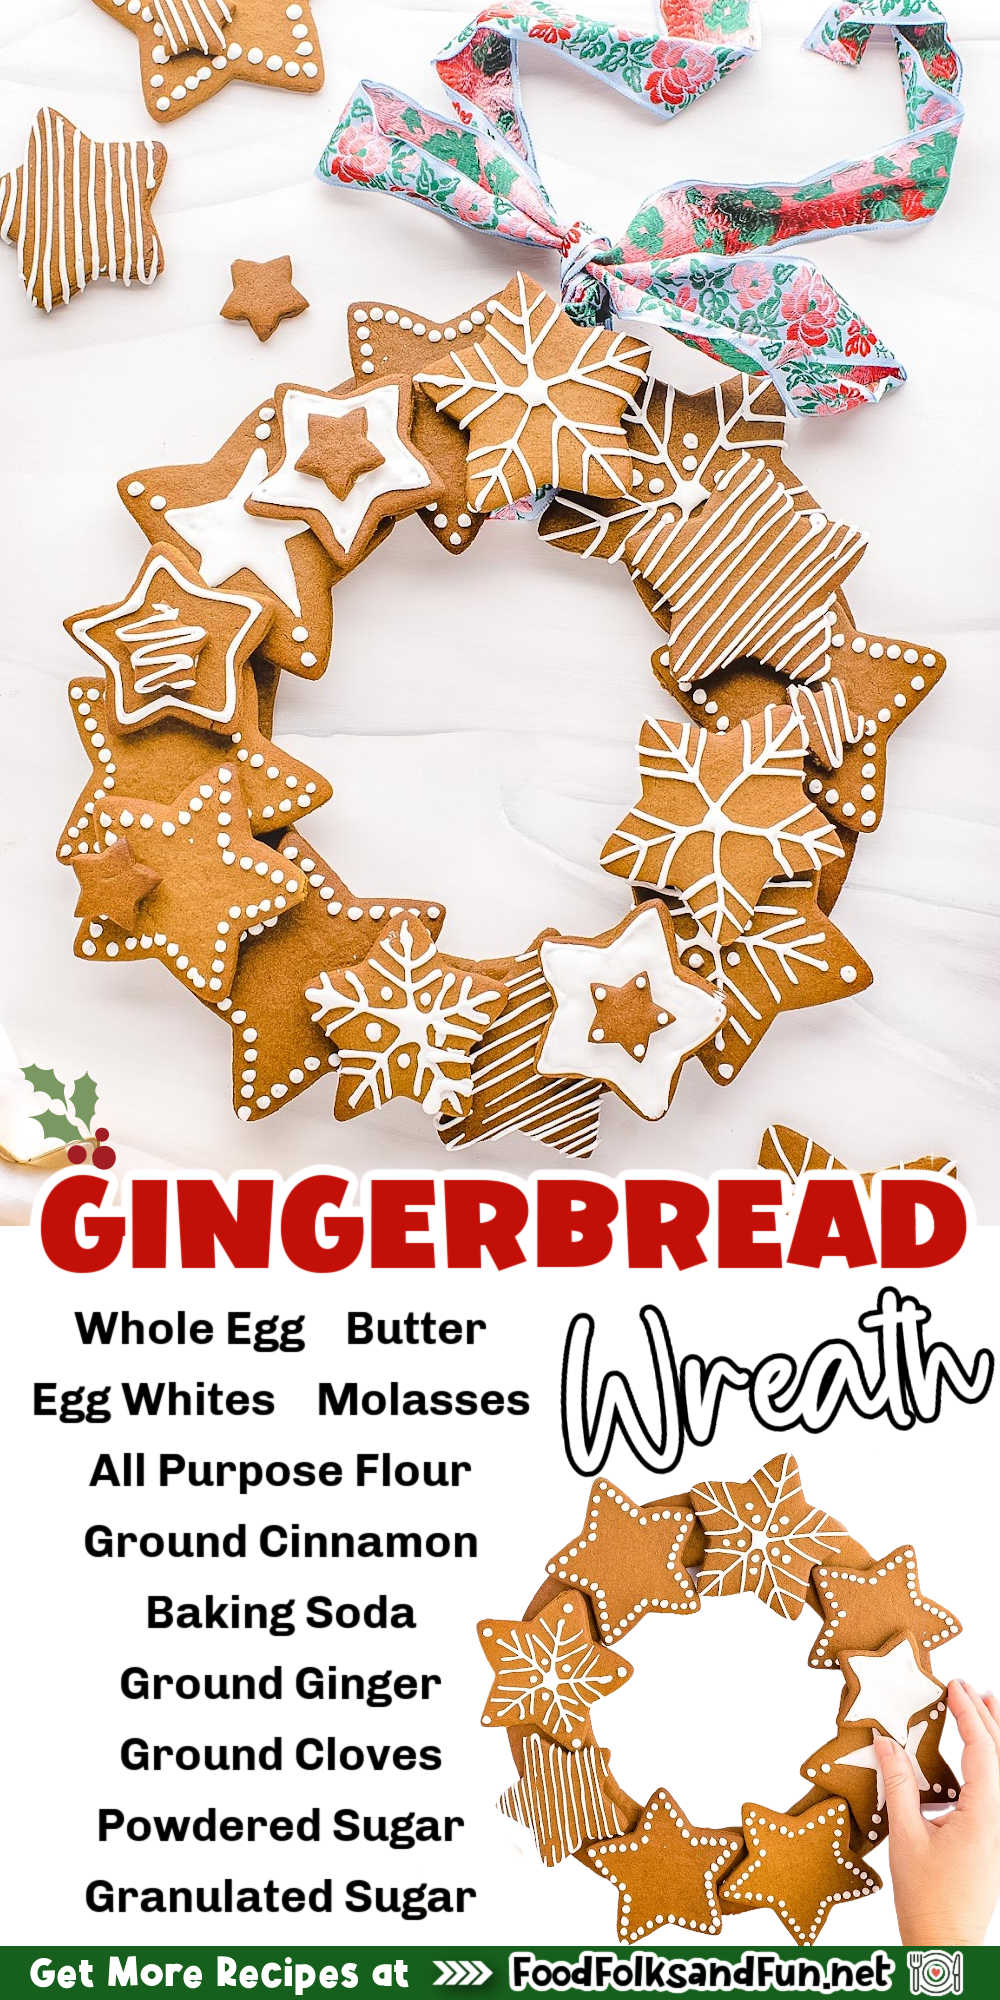 This beautiful Gingerbread Wreath is made from lightly spiced cookies and would make a wonderful festive centerpiece. via @foodfolksandfun